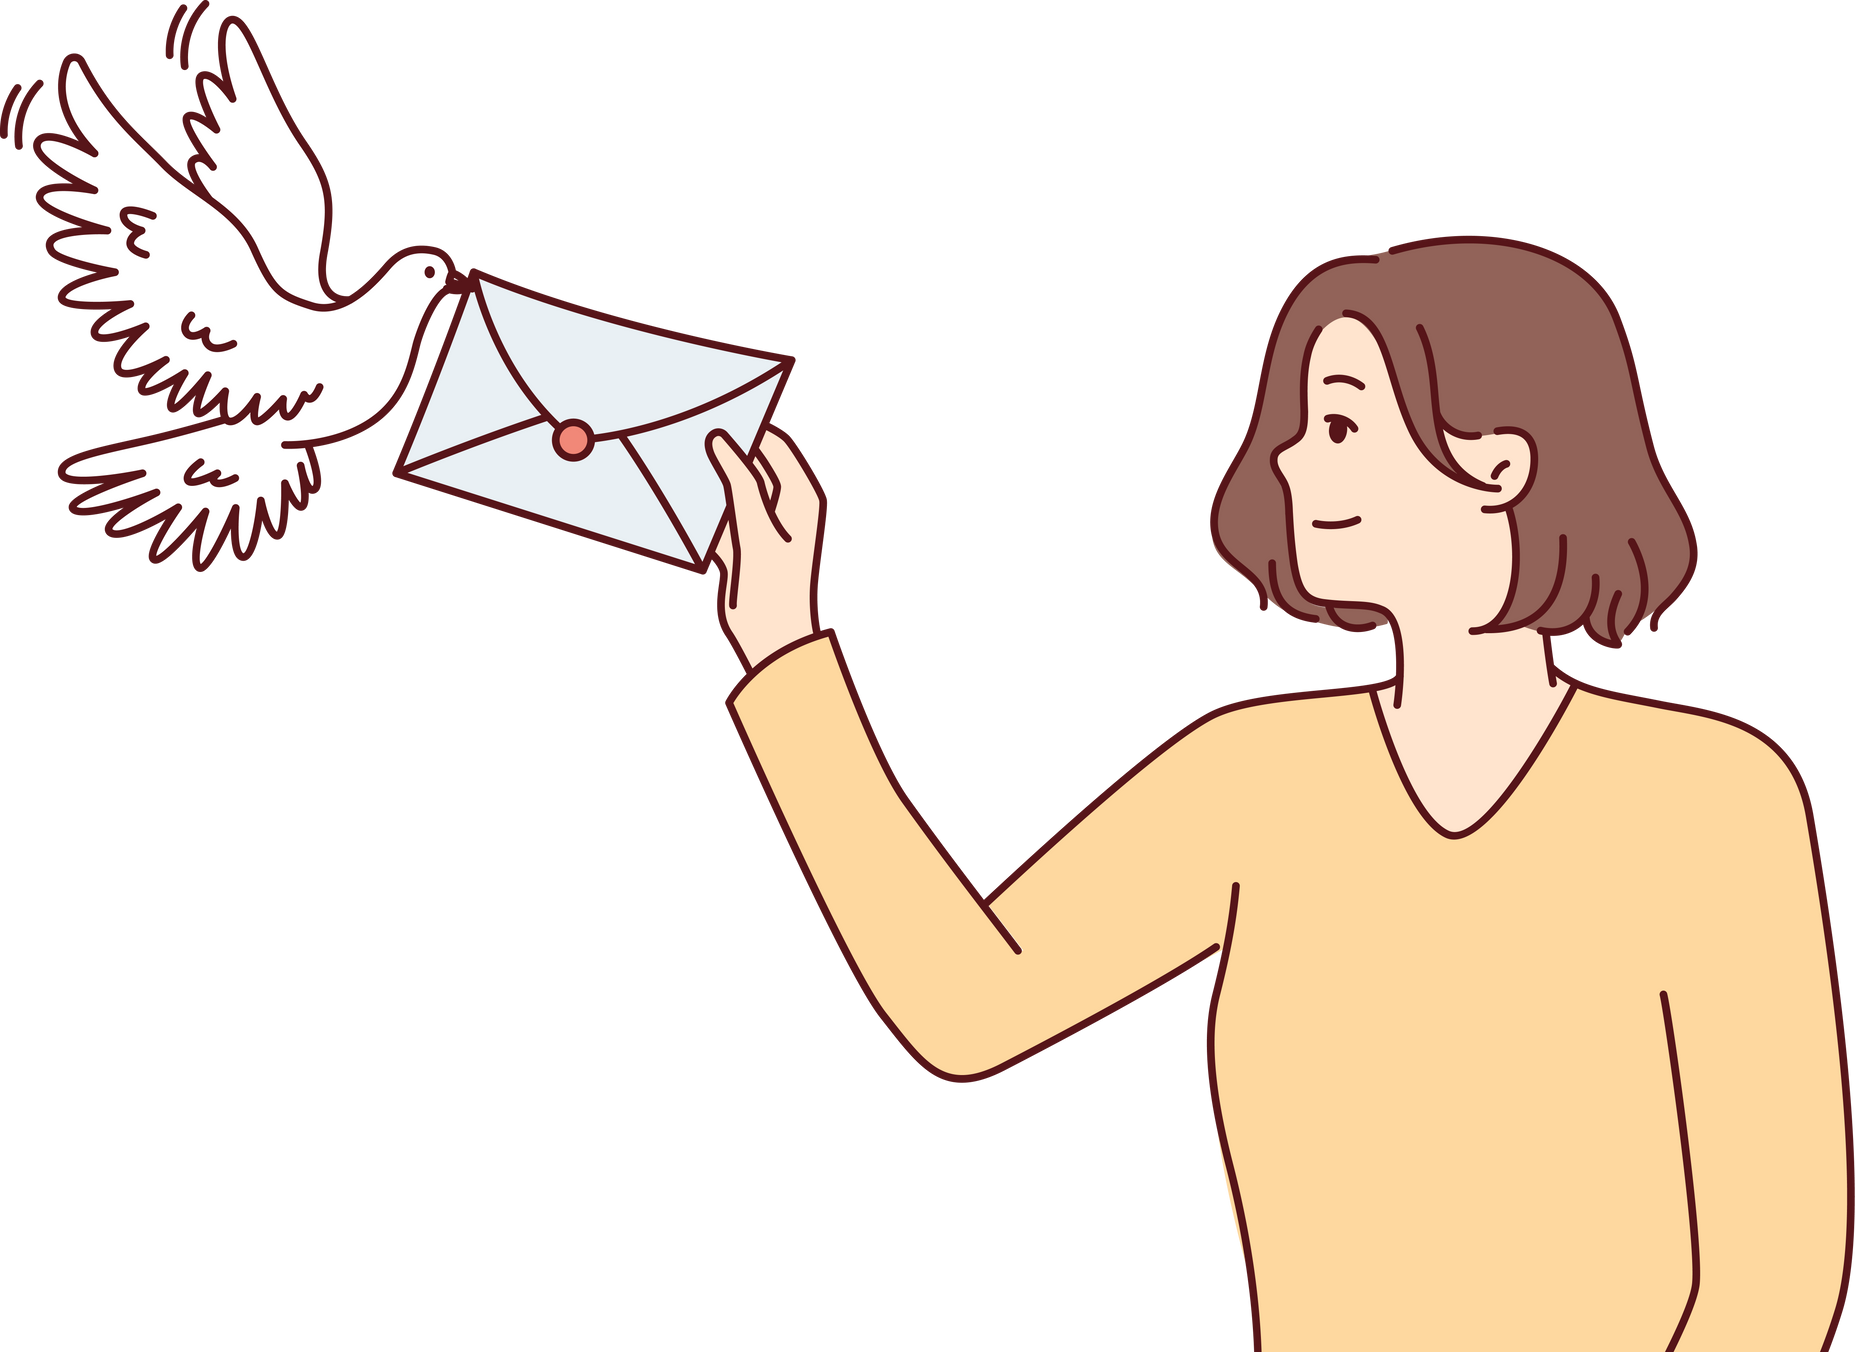 Smiling Woman Holds Out Envelope to Pigeon to Deliver Message to Boyfriend or Friends. Vector Image